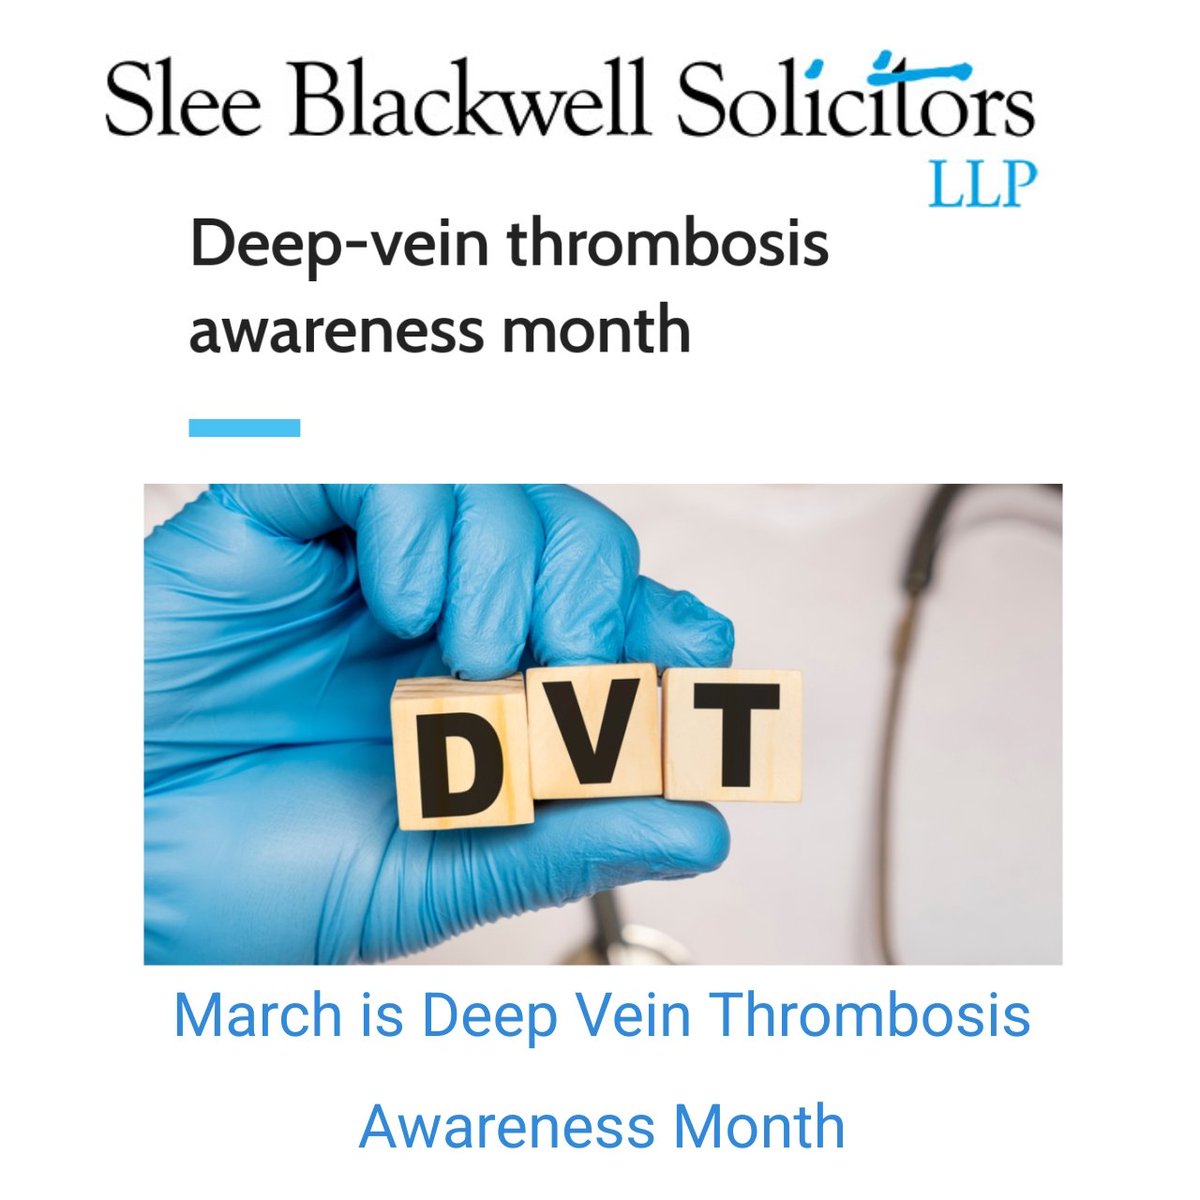 Every year, 1 in 1,000 people develop deep-vein thrombosis (DVTa). Read more here about symptoms & treatment of DVT:- sleeblackwell.co.uk/legal-articles… We deal with DVT related claims. For guidance call 0333 888 0404 or email info@sleeblackwell.co.uk #DVT #medicalnegligence